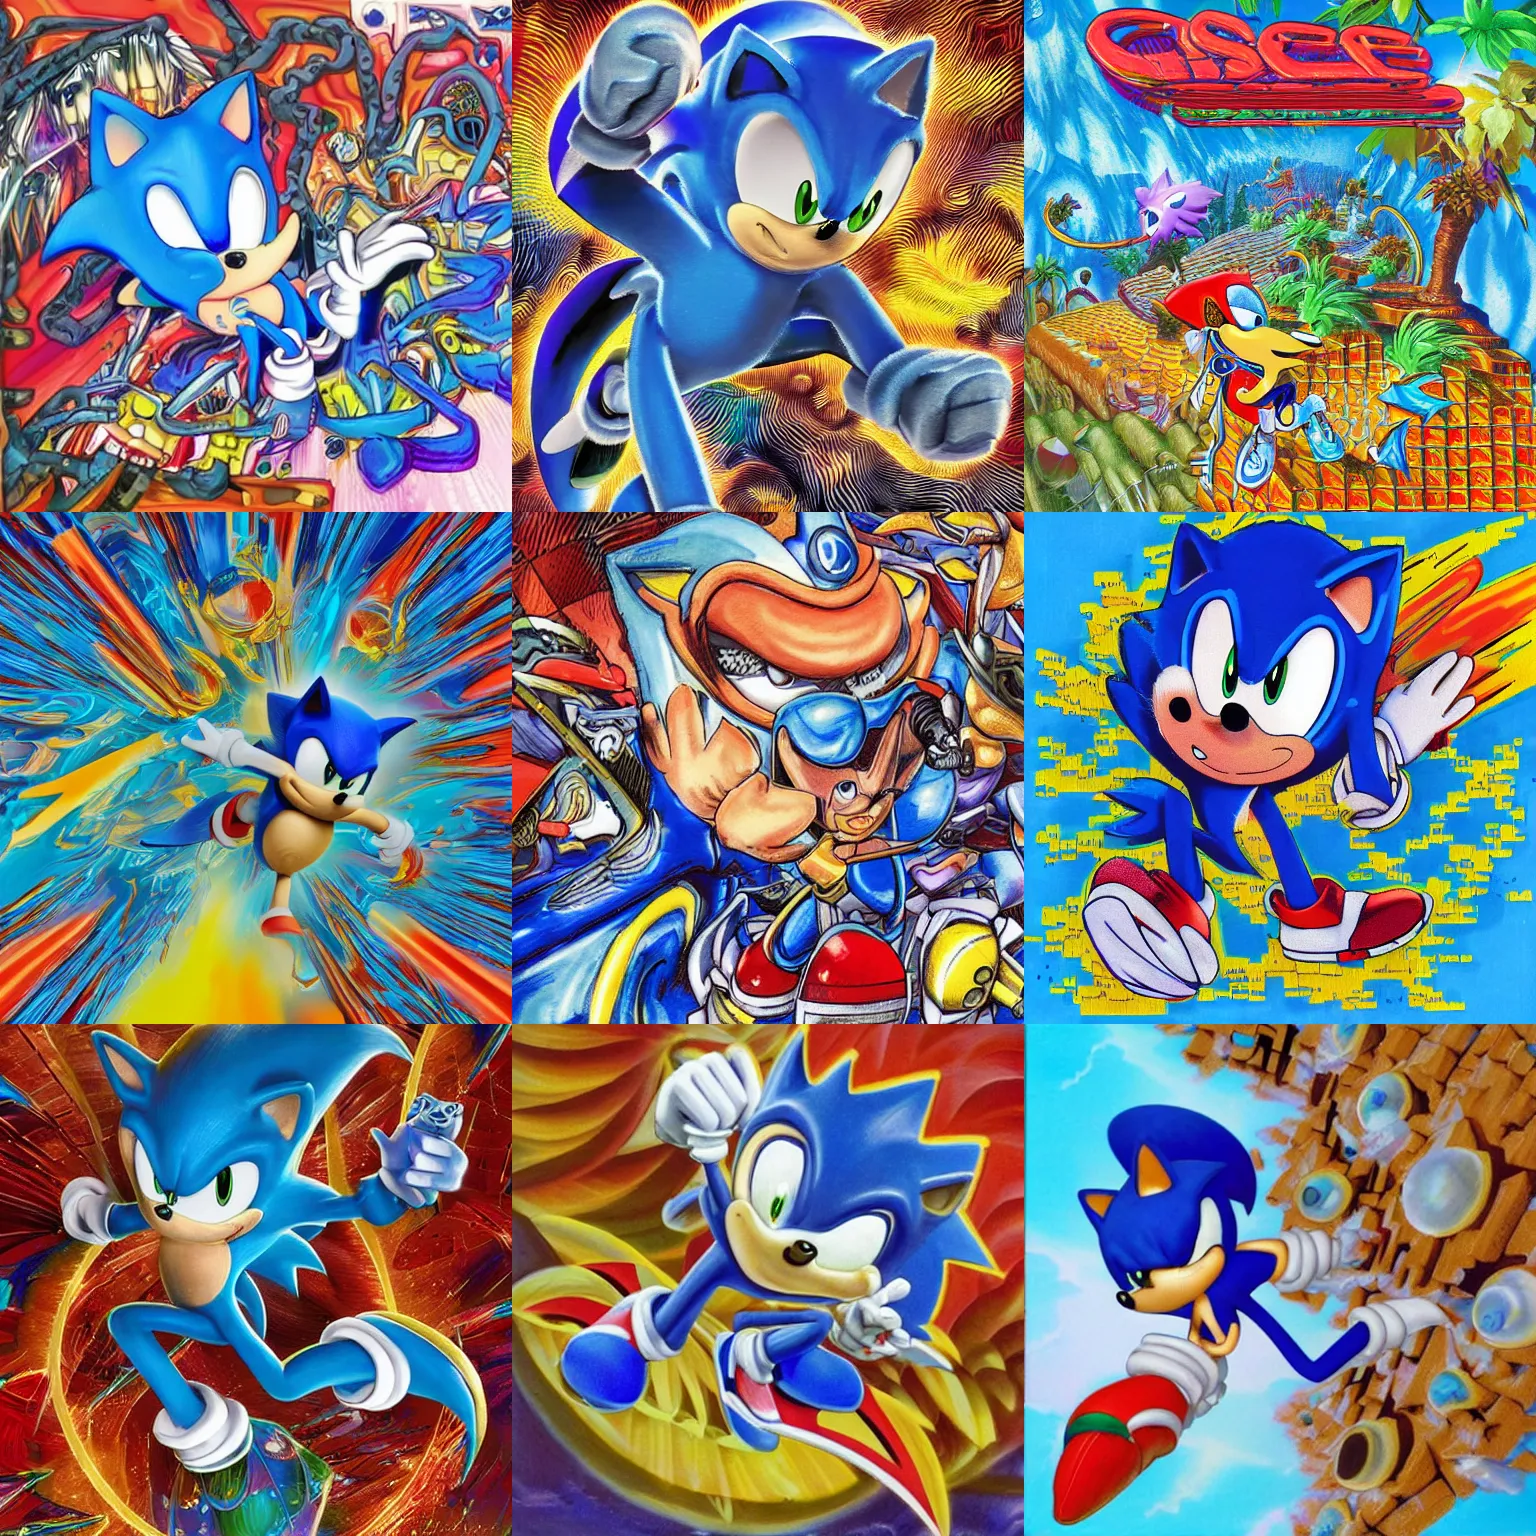 Prompt: sonic the hedgehog in a surreal, sharp, detailed professional, high quality airbrush art MGMT album cover of a liquid dissolving LSD DMT blue sonic the hedgehog surfing through cyberspace, checkerboard background, 1990s 1992 Sega Genesis video game album cover